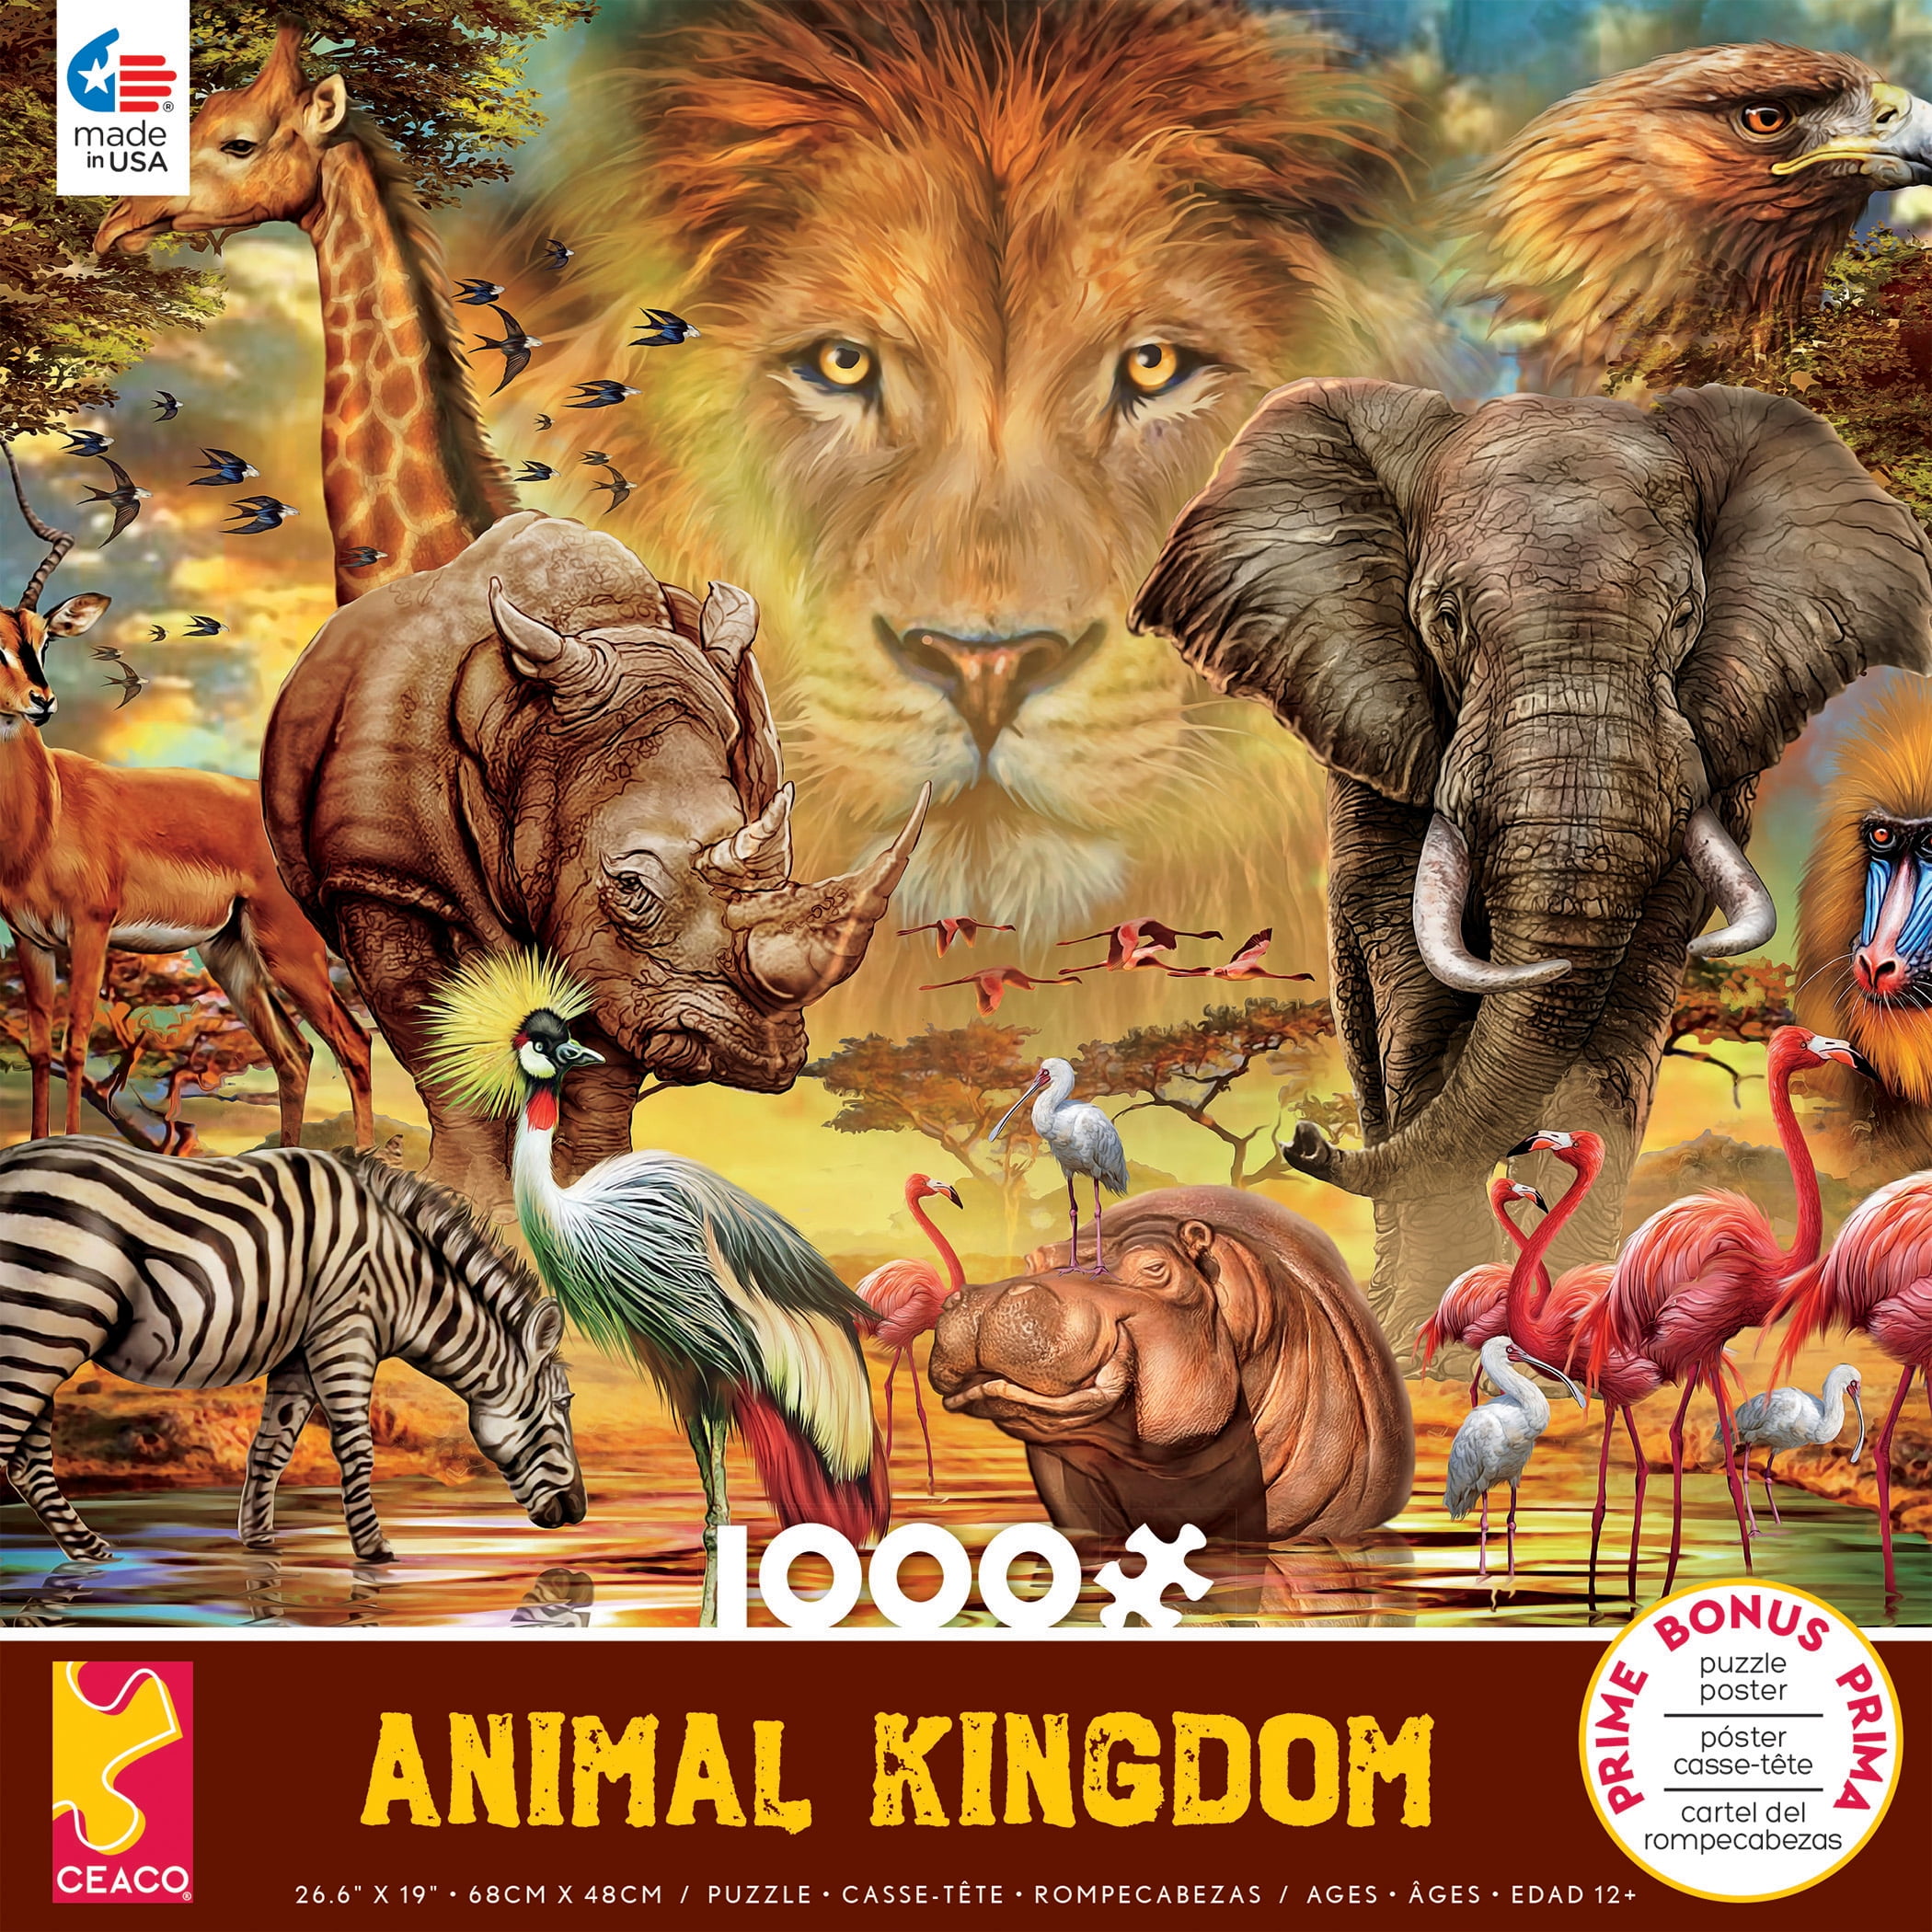 4000 Pieces Wooden Animal Puzzle for Adults-Thinking Lion-Puzzle Color Challenge Jigsaw Puzzles for Adults and Kids Education Gift